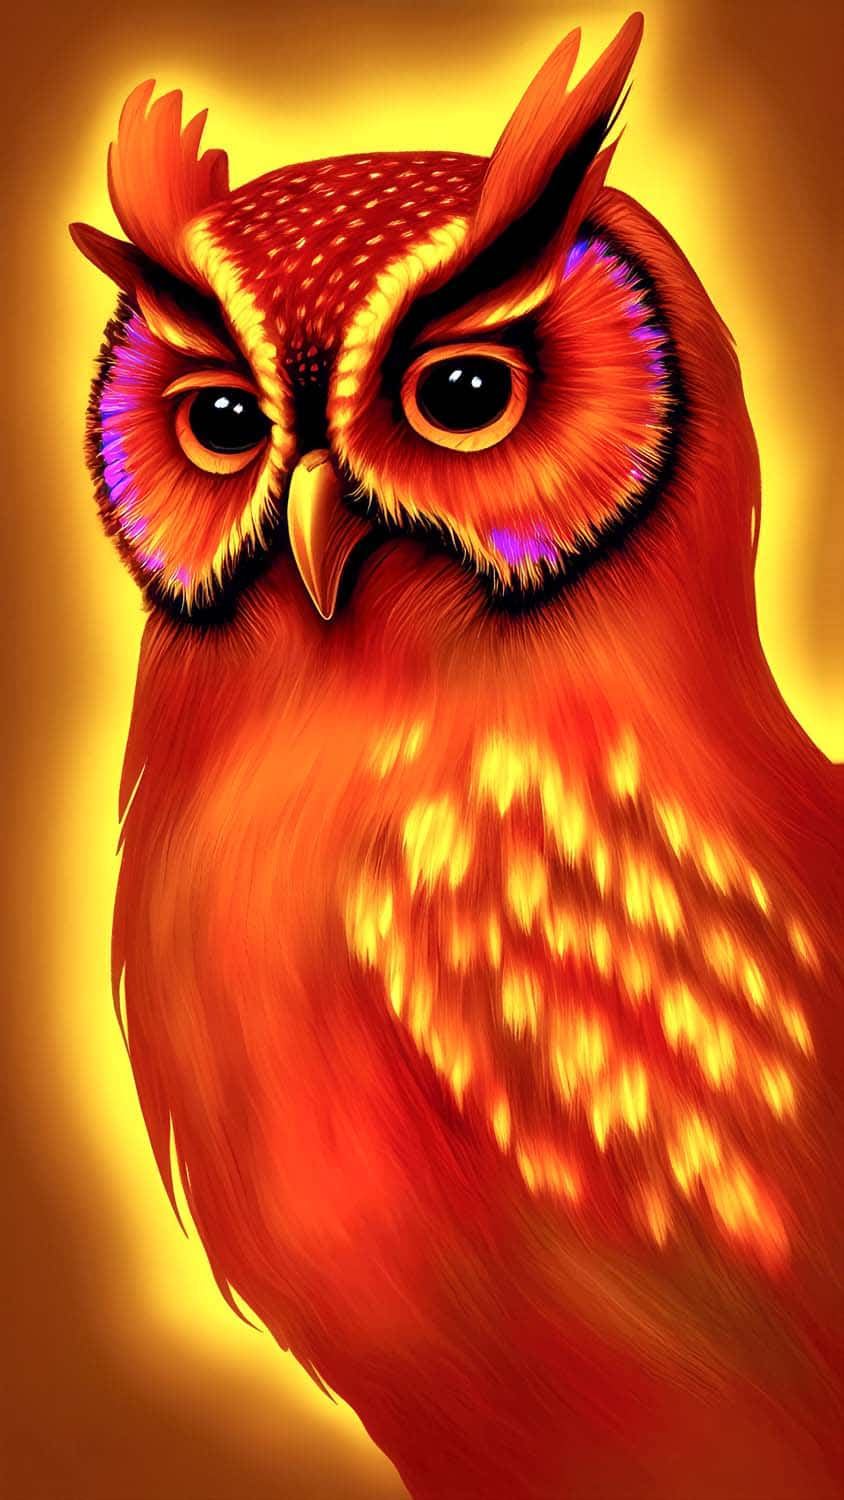 Supreme Owl IPhone Wallpaper HD  IPhone Wallpapers